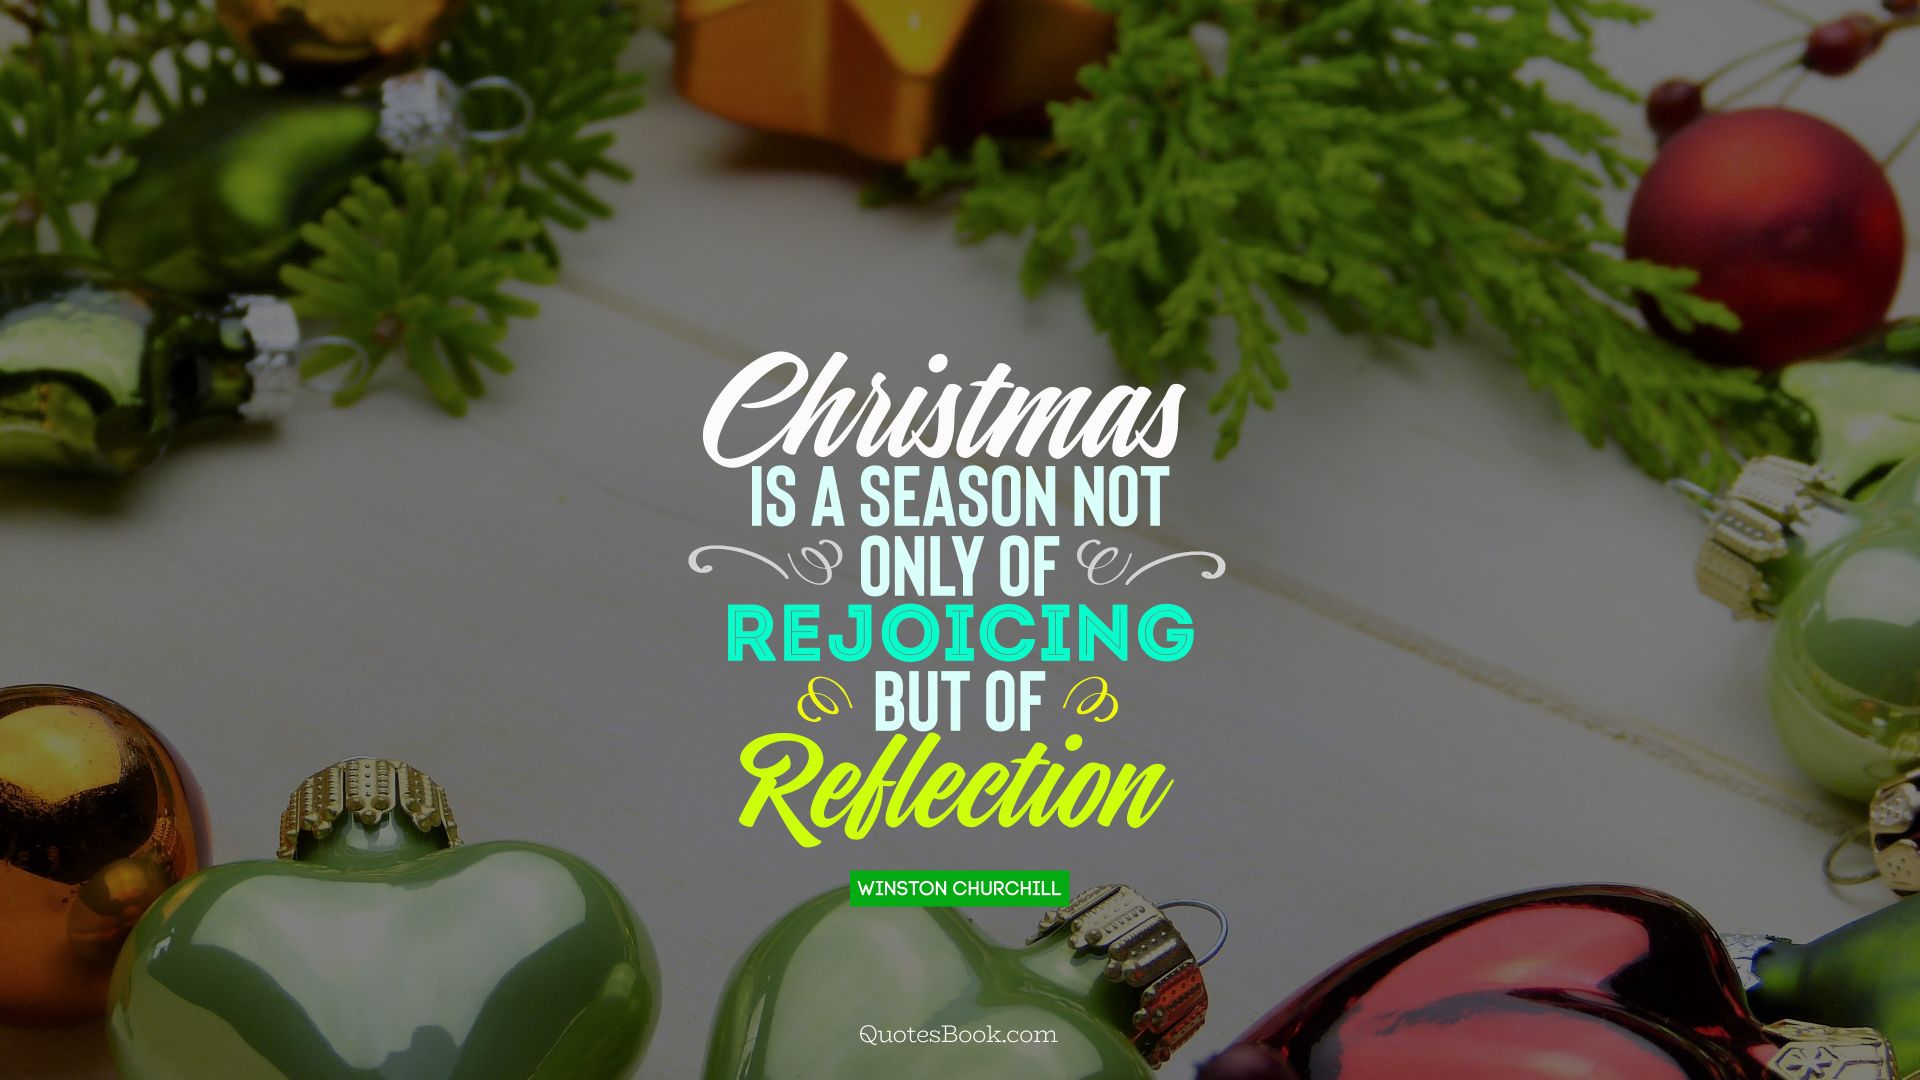 Christmas is a season not only of rejoicing but of reflection. - Quote by Winston Churchill